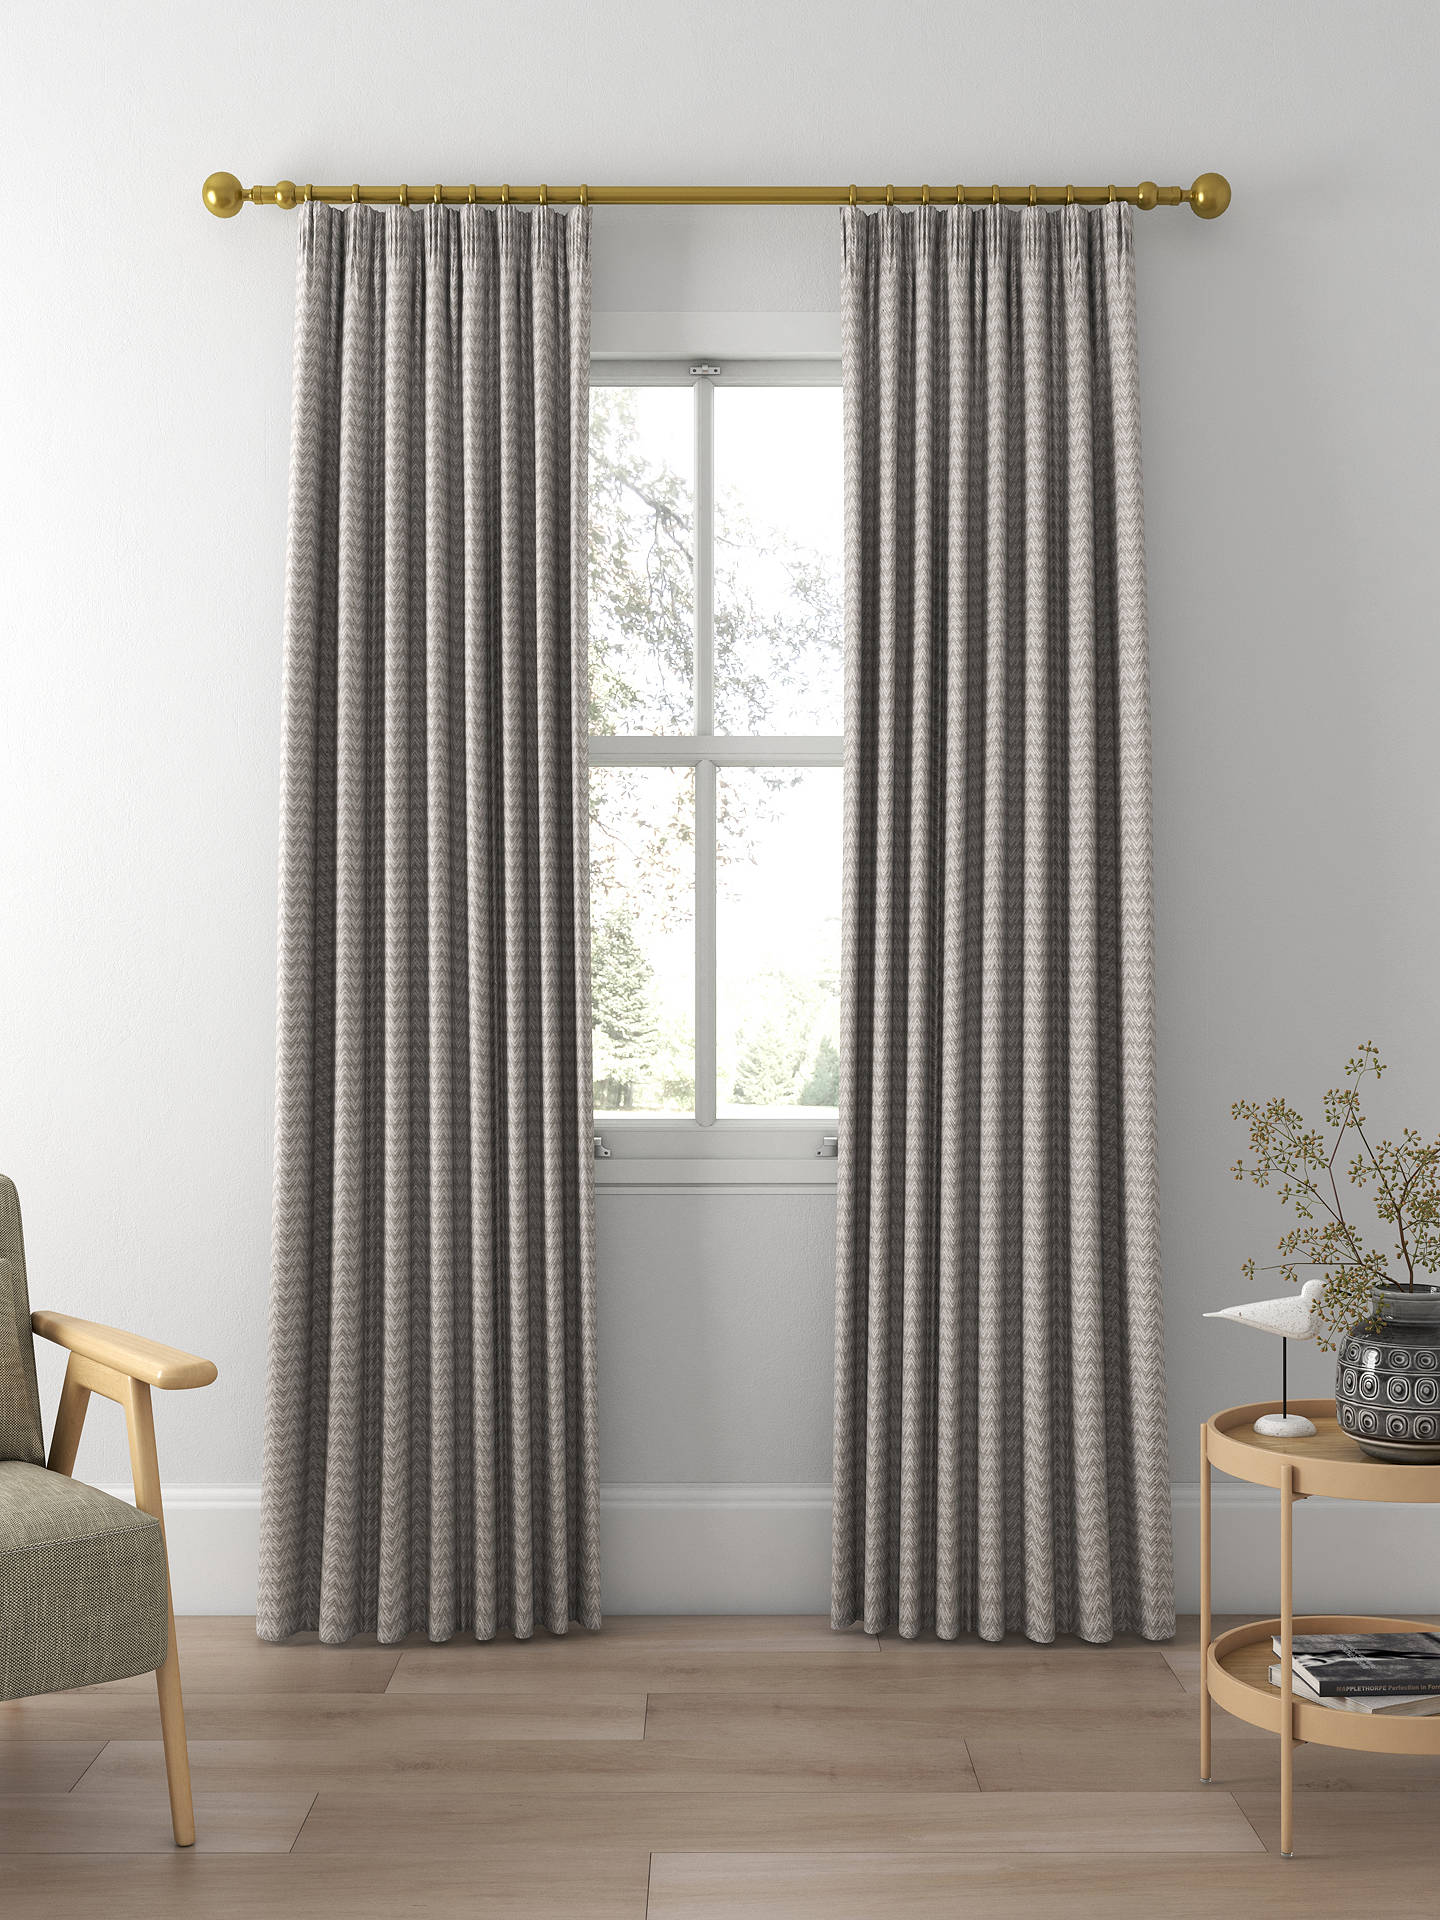 Sanderson Herring Made to Measure Curtains, Gull